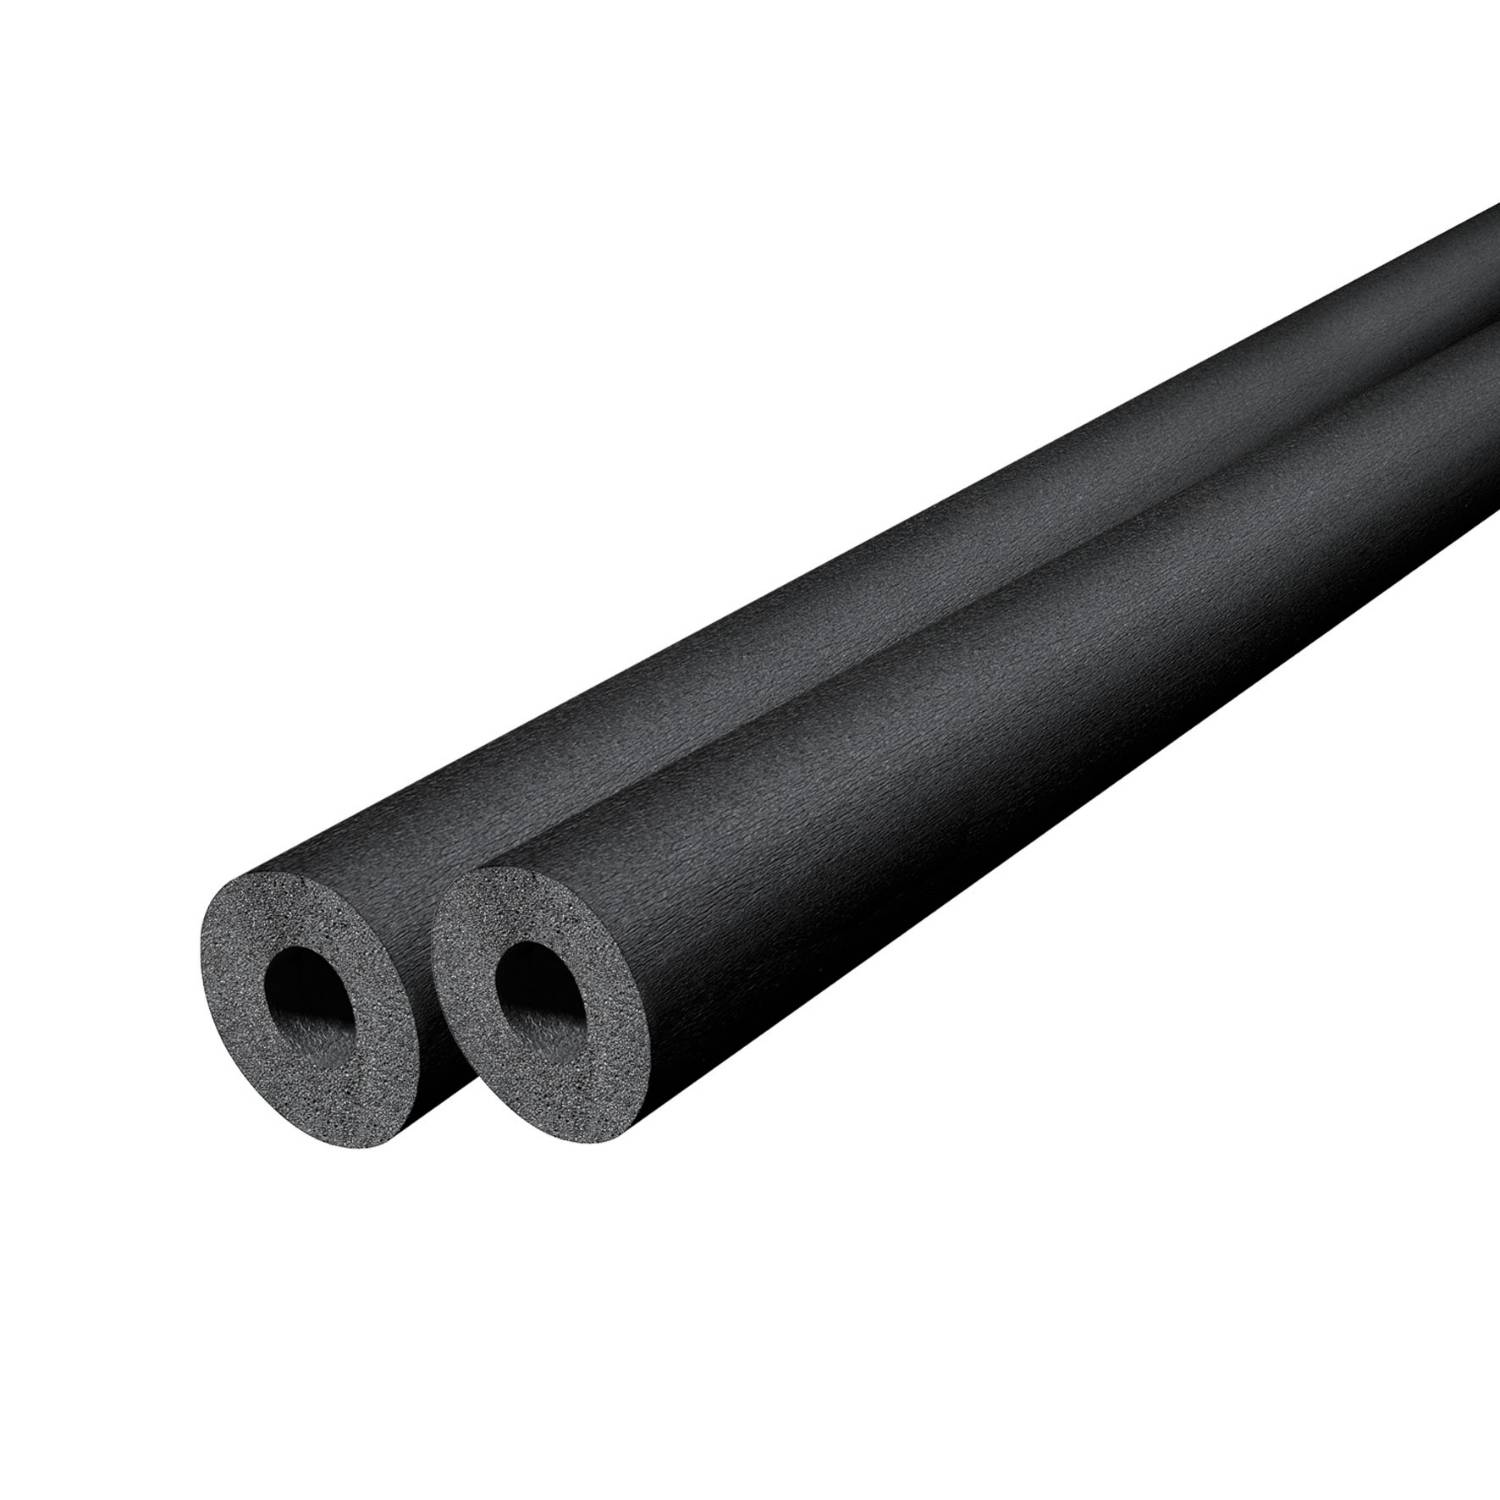 Kaiflex HFplus Tubes - Closed cell rubber pipe insulation